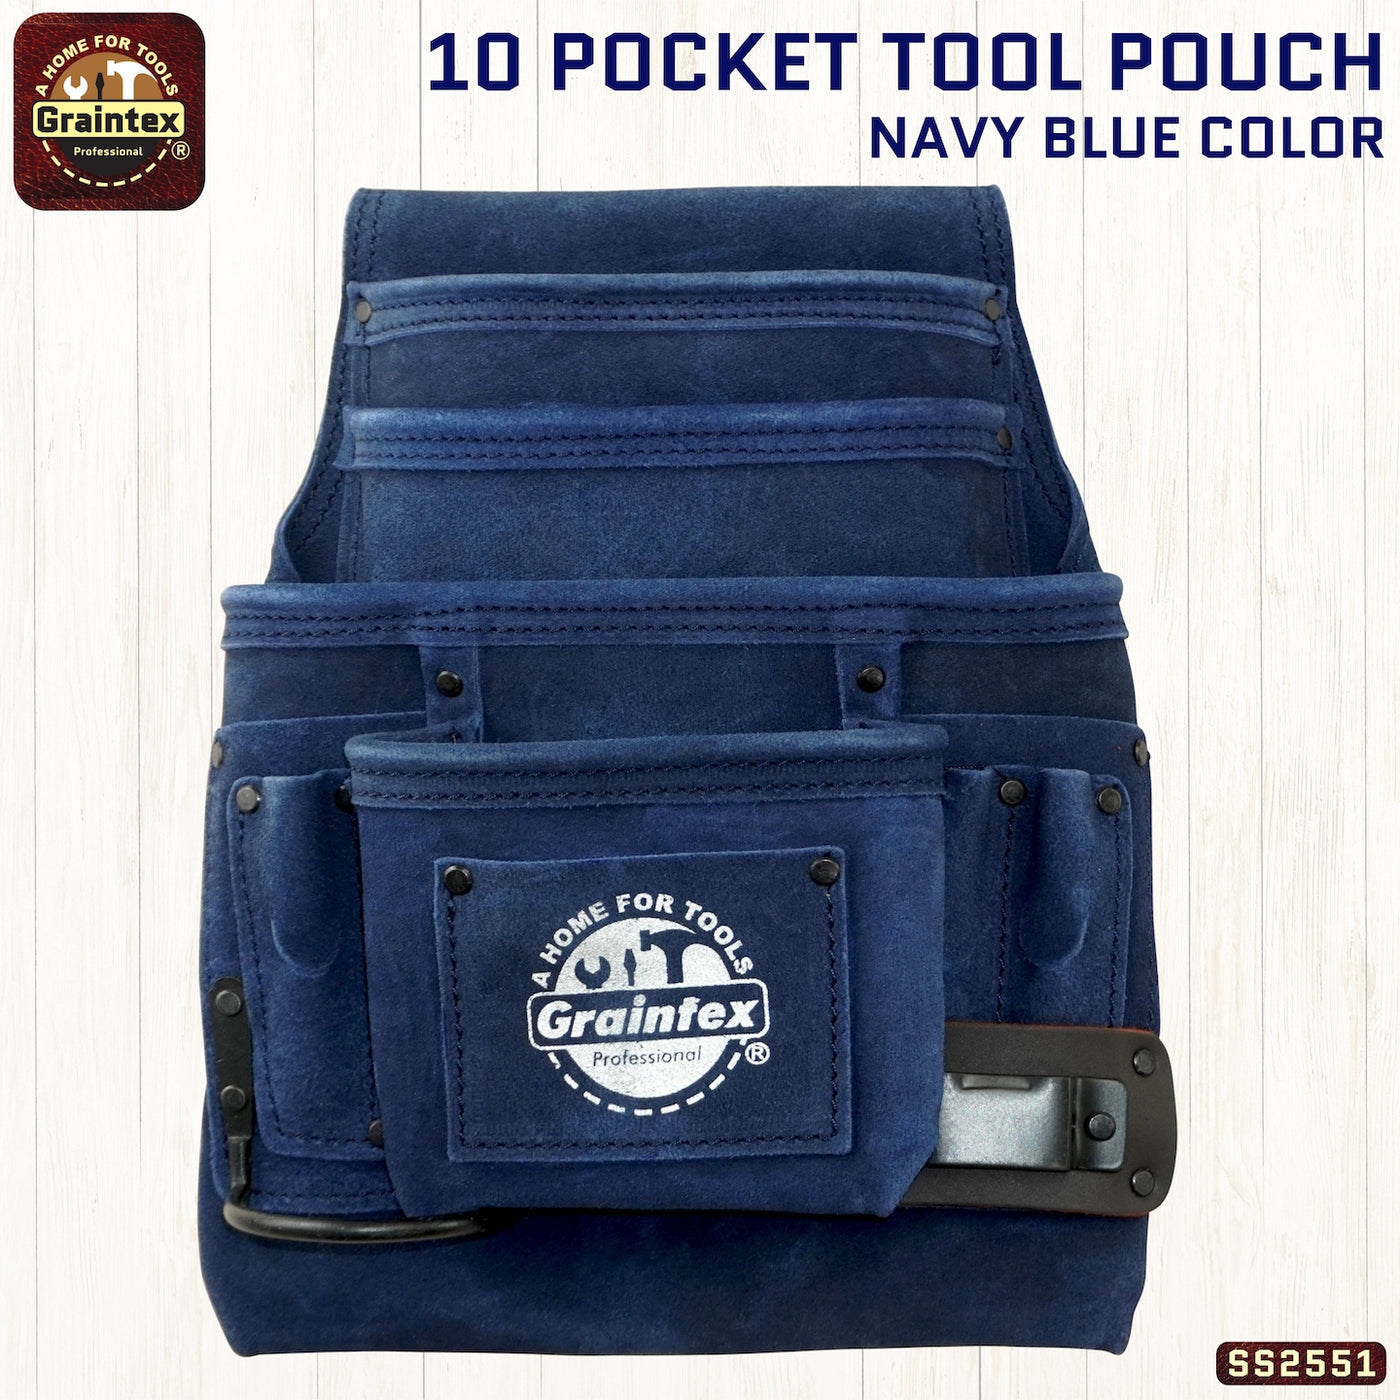 SS2551 :: 10 Pocket Nail & Tool Pouch Navy Blue Color Suede Leather